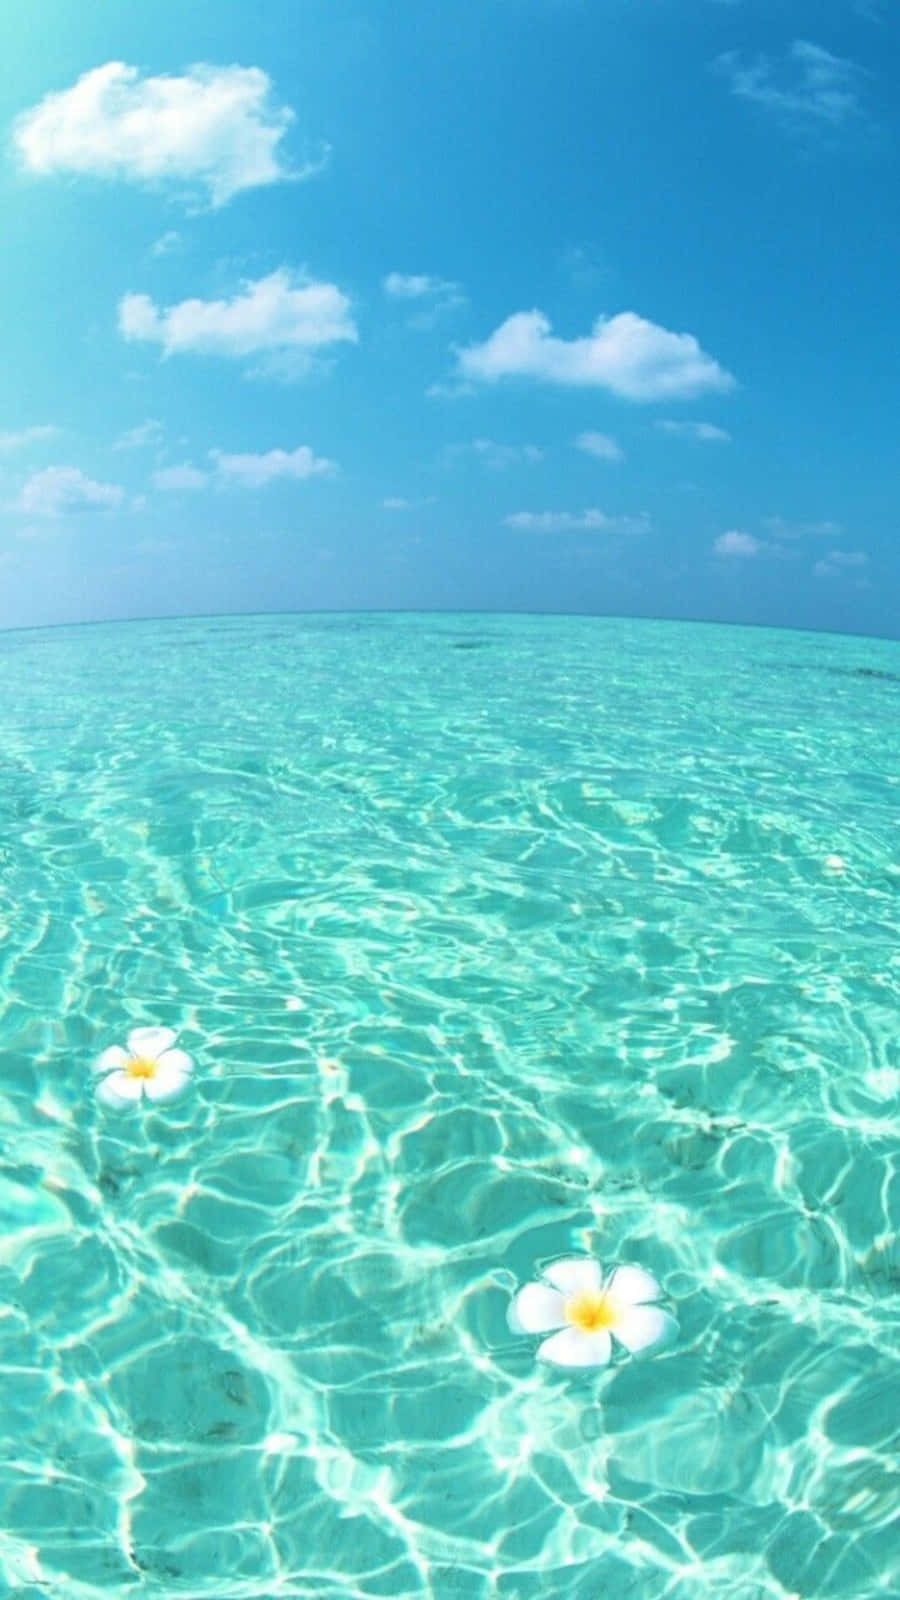 A Clear Blue Ocean With White Flowers Floating In The Water Wallpaper